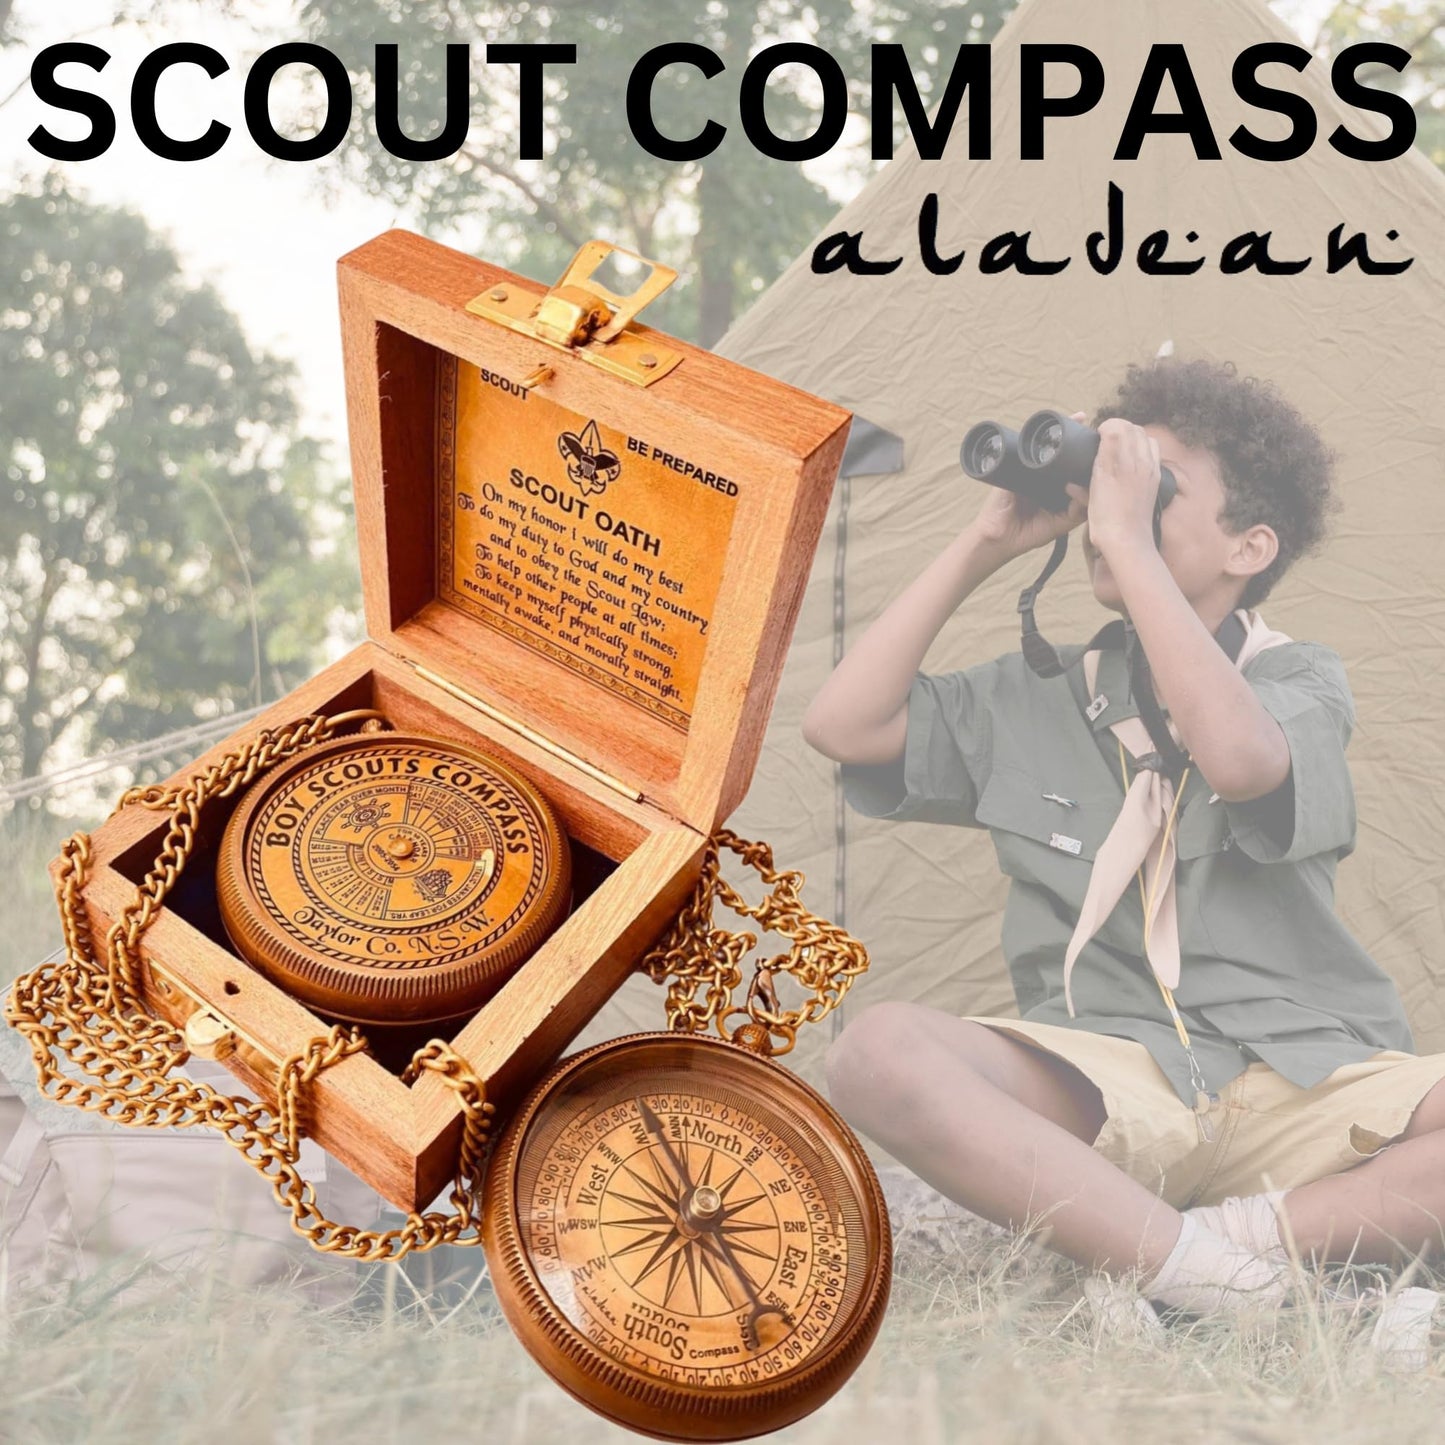 Boys Scout Compass Gift - Engraved Eagle Scout Oath Compass in Wood Box Scout Be Prepared Camping Orienteering Compass, Hiking Backpacking Compass Gift, 50 Year calander